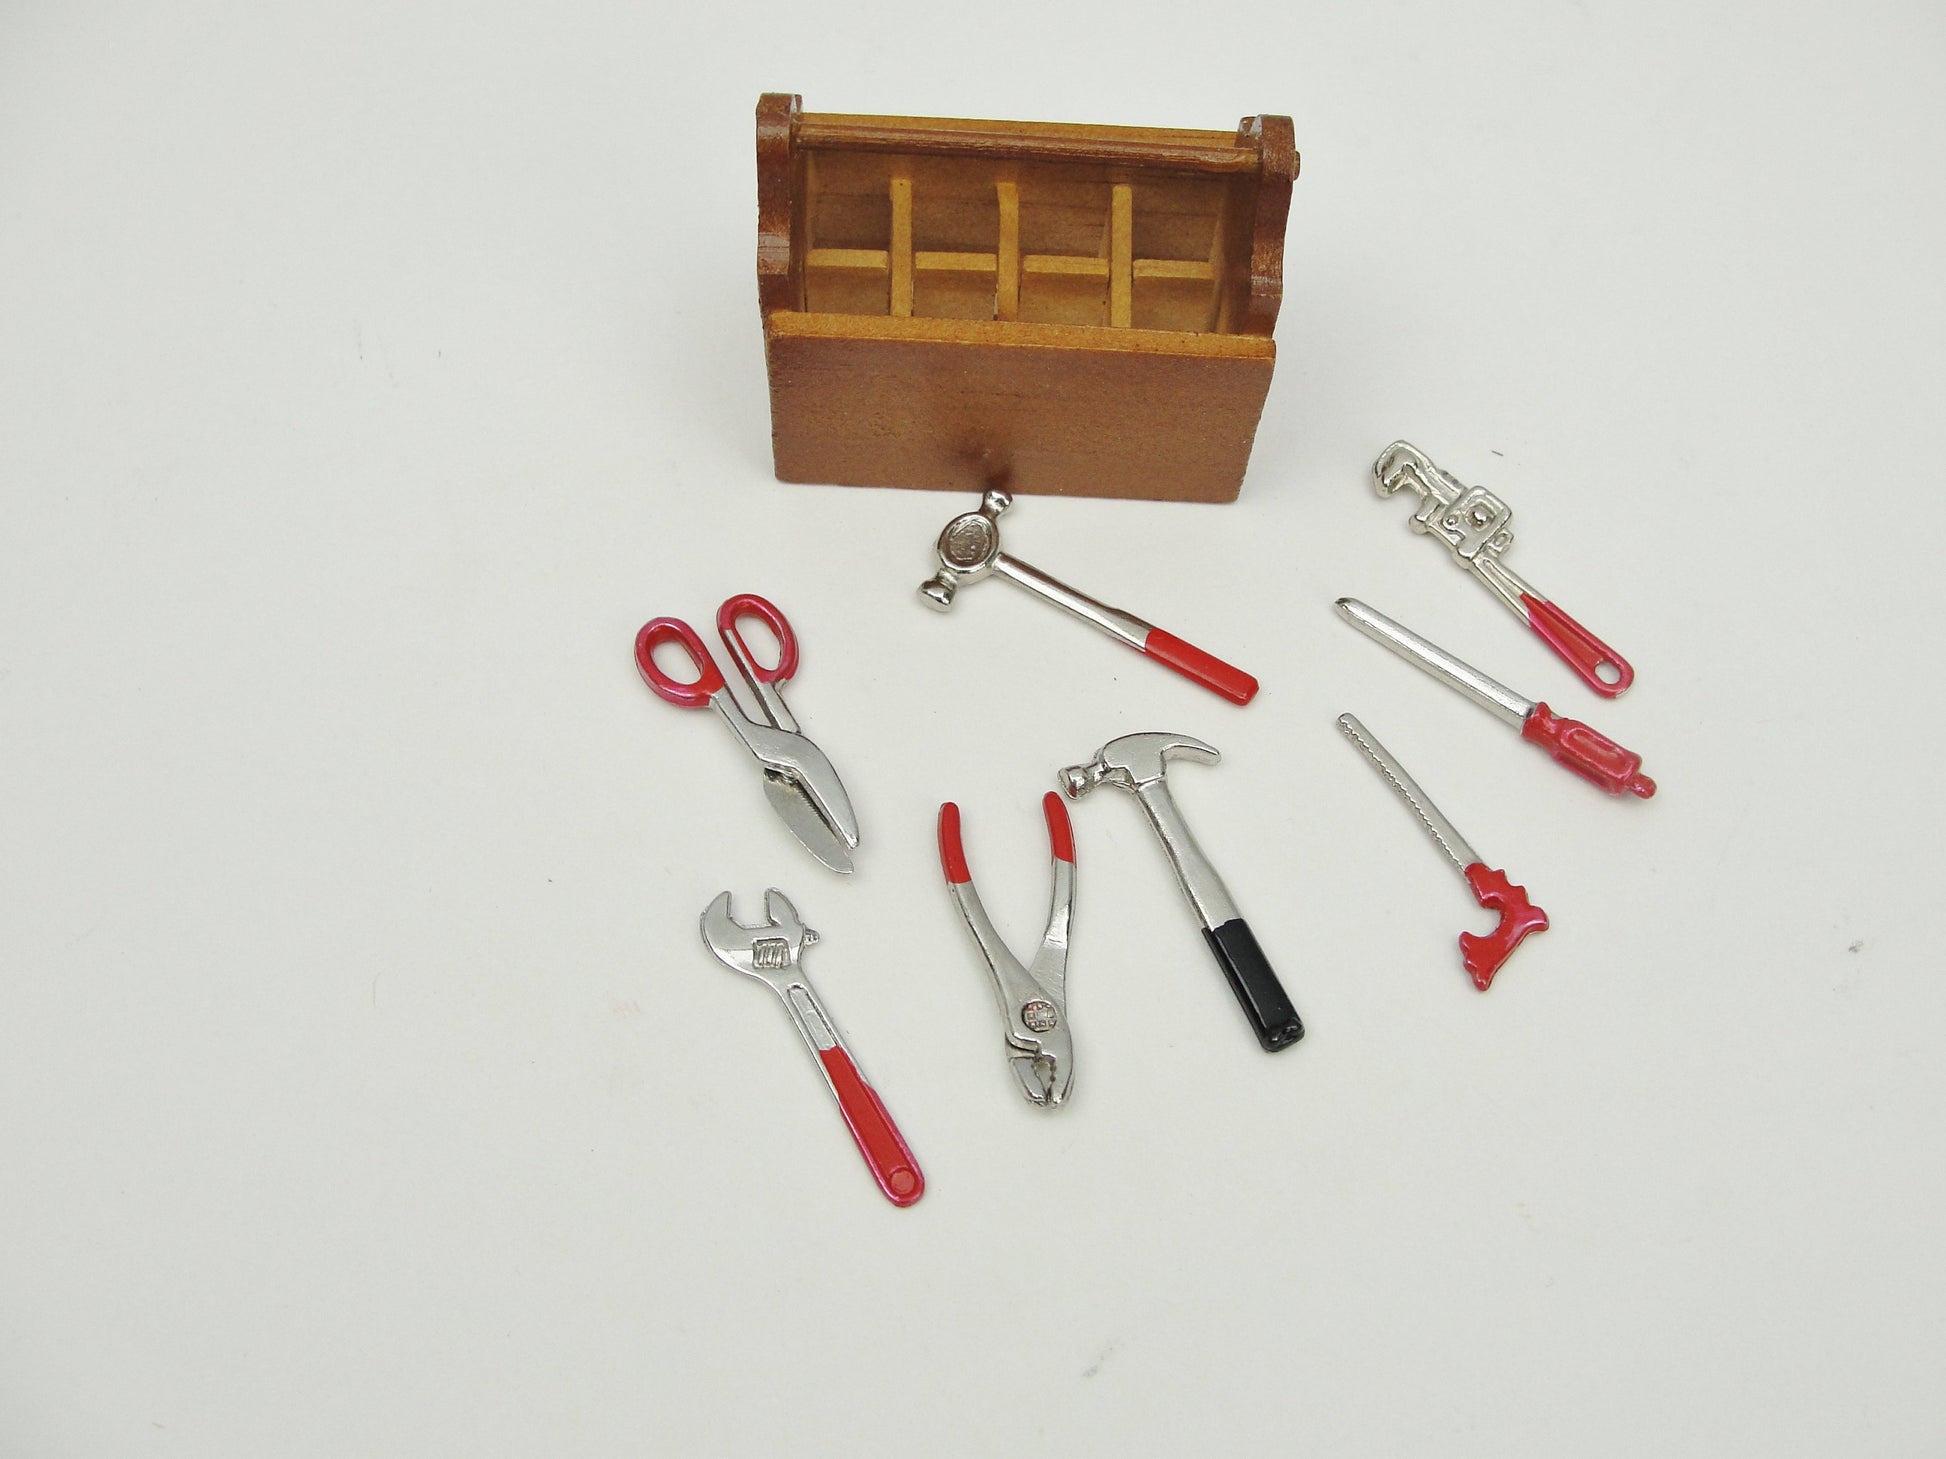 Dollhouse Miniature Set of 7 Shop Tools in Metal